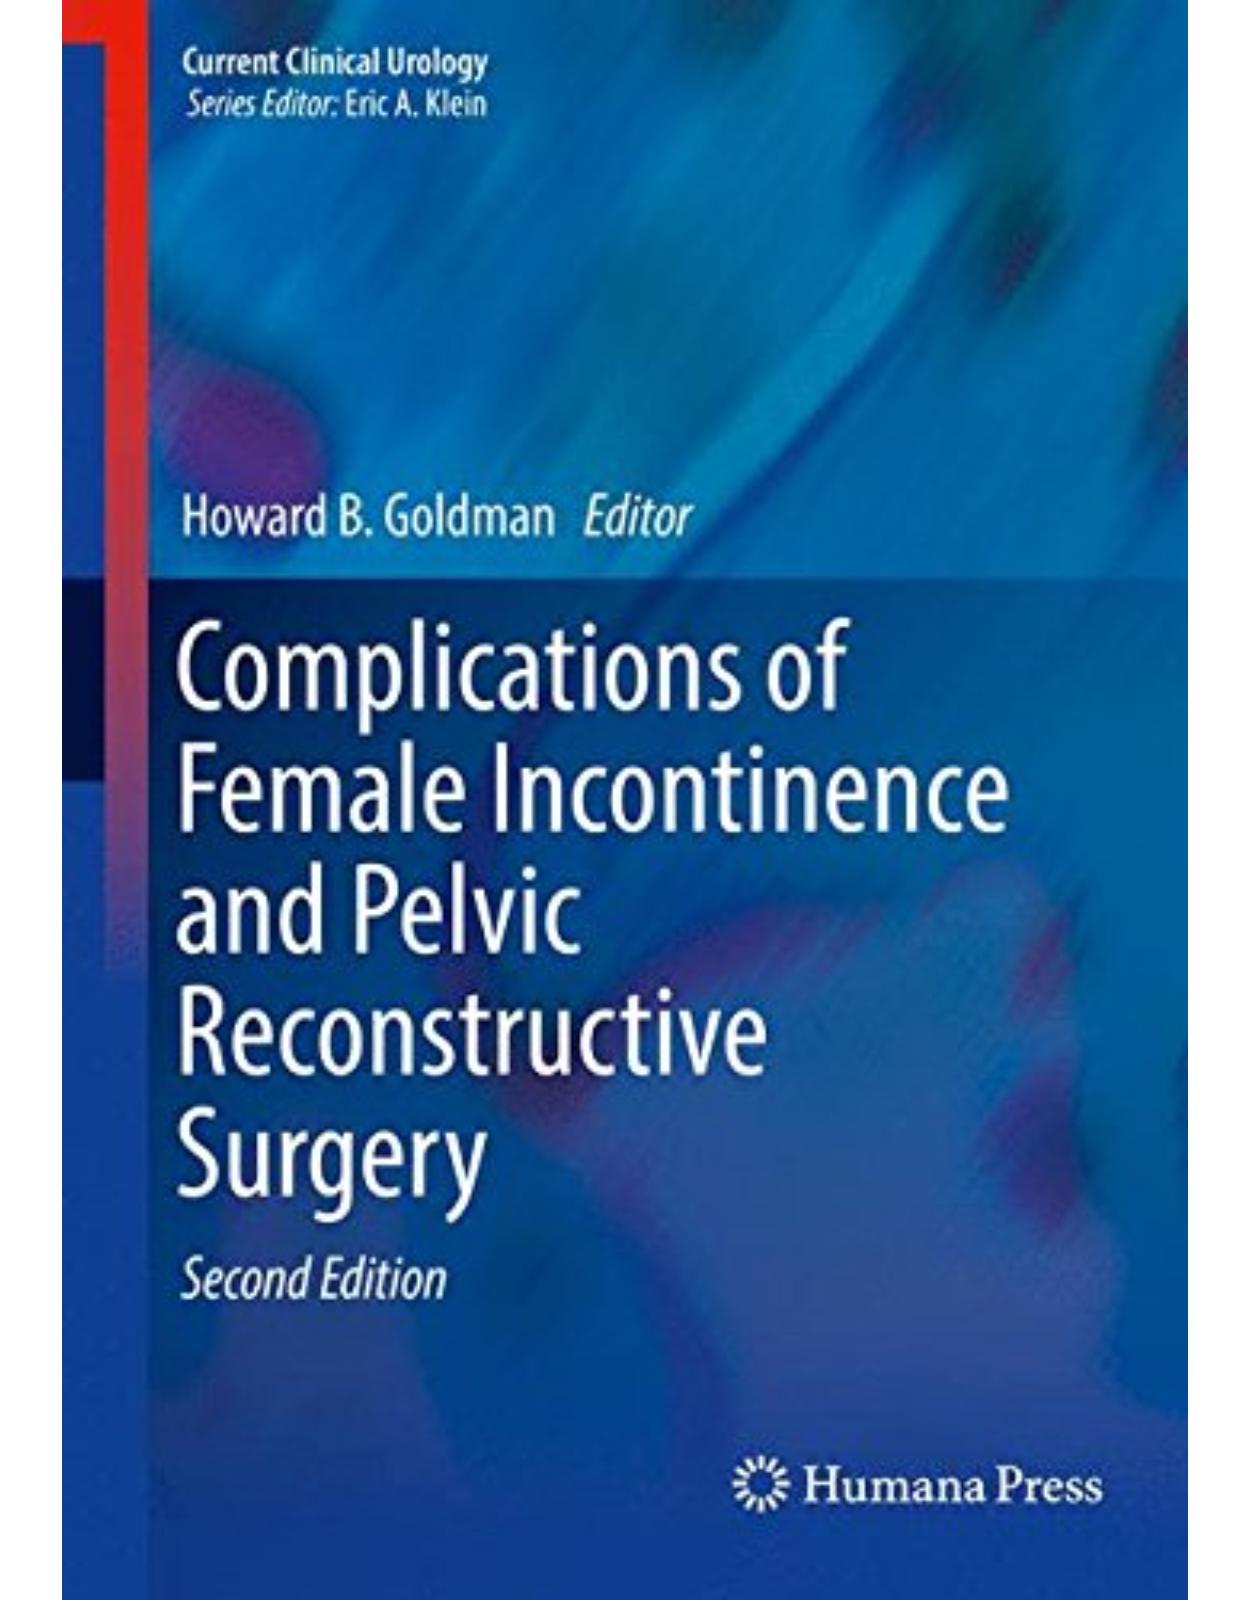 Complications of Female Incontinence and Pelvic Reconstructive Surgery 